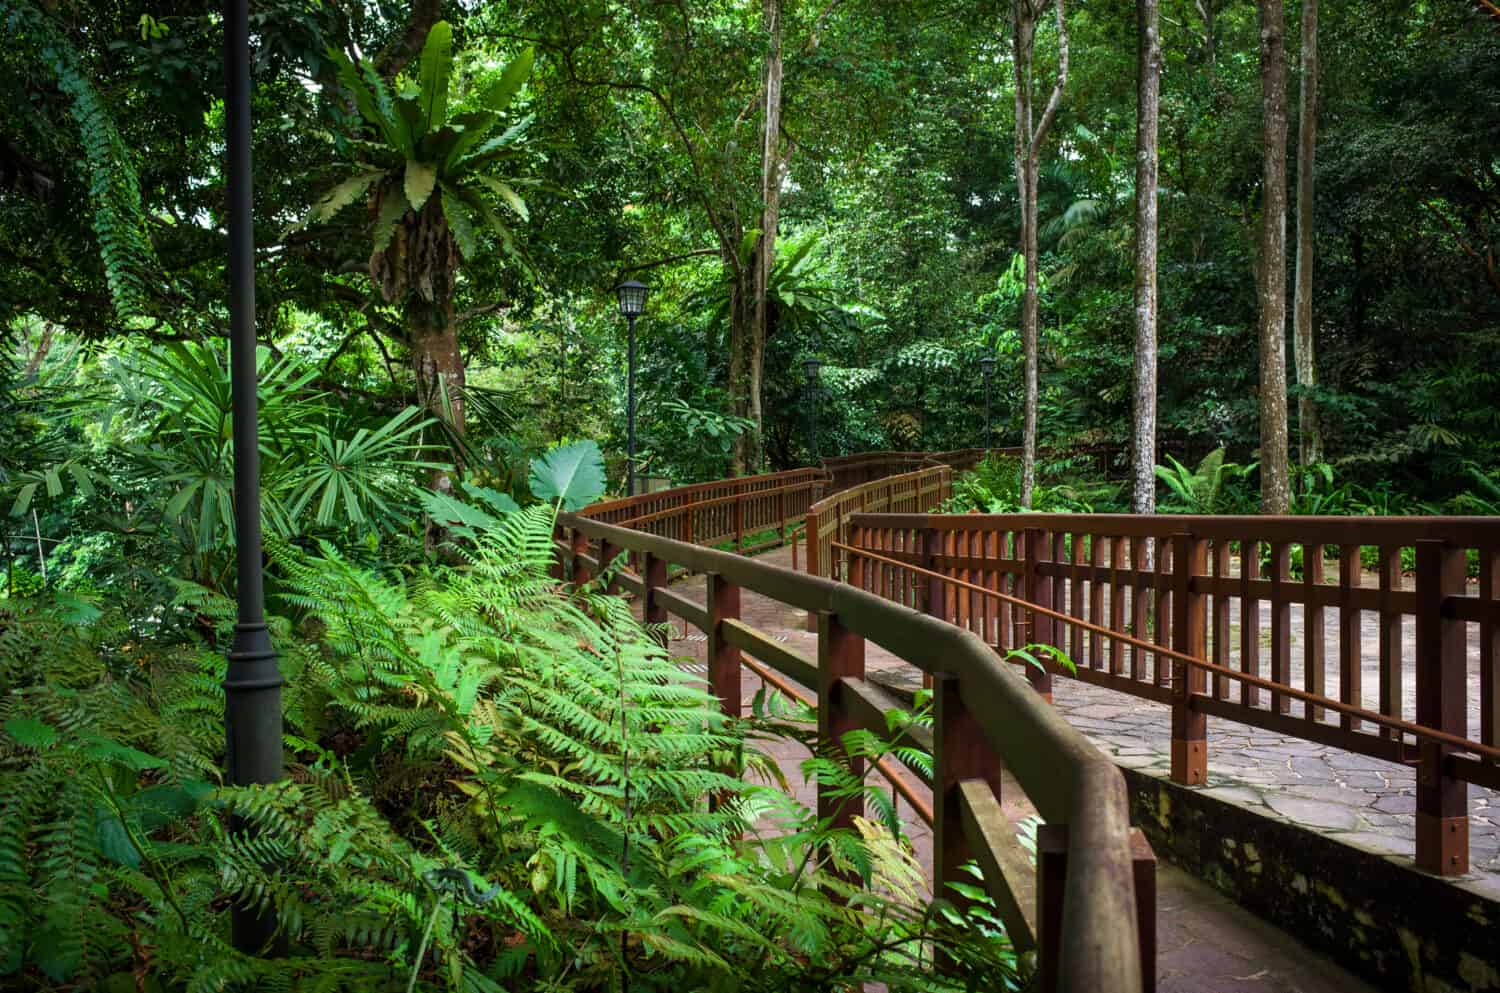 Walkway through the tropical ferns and trees of Bukit Timah Public Nature Park in Singapore